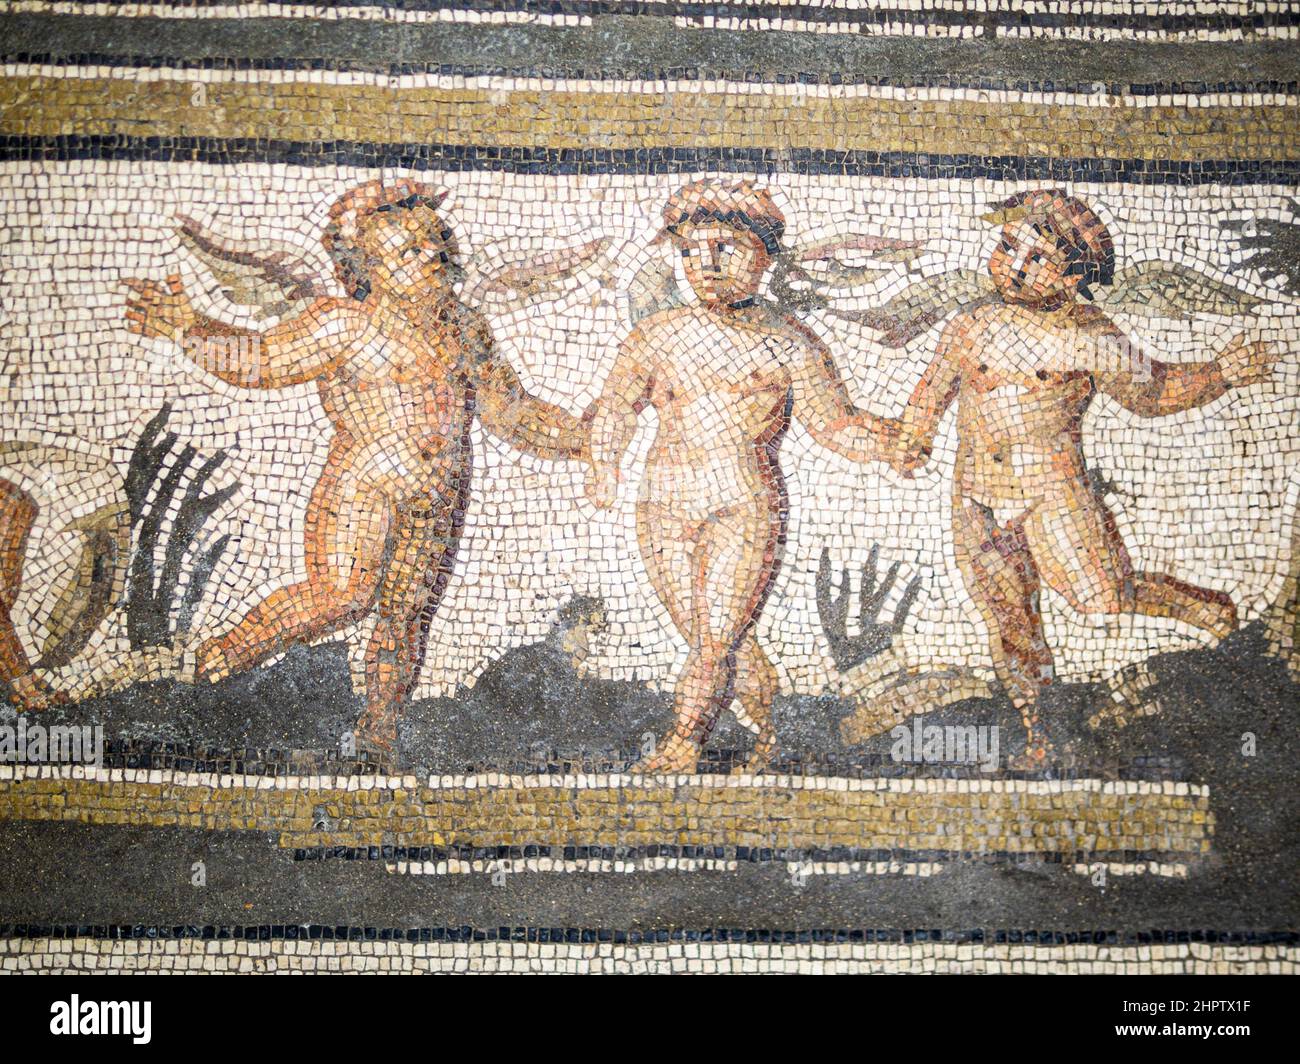 Detail from a Greek Mosaic of 3 winged nymphs holding hands in a garden: Fromm the mosaic of the Seasons found in Daphine near Antioch-sur-Orontes, Antakya, Turkey.  c. 325 AD.   Made from cubes of limestone. Stock Photo